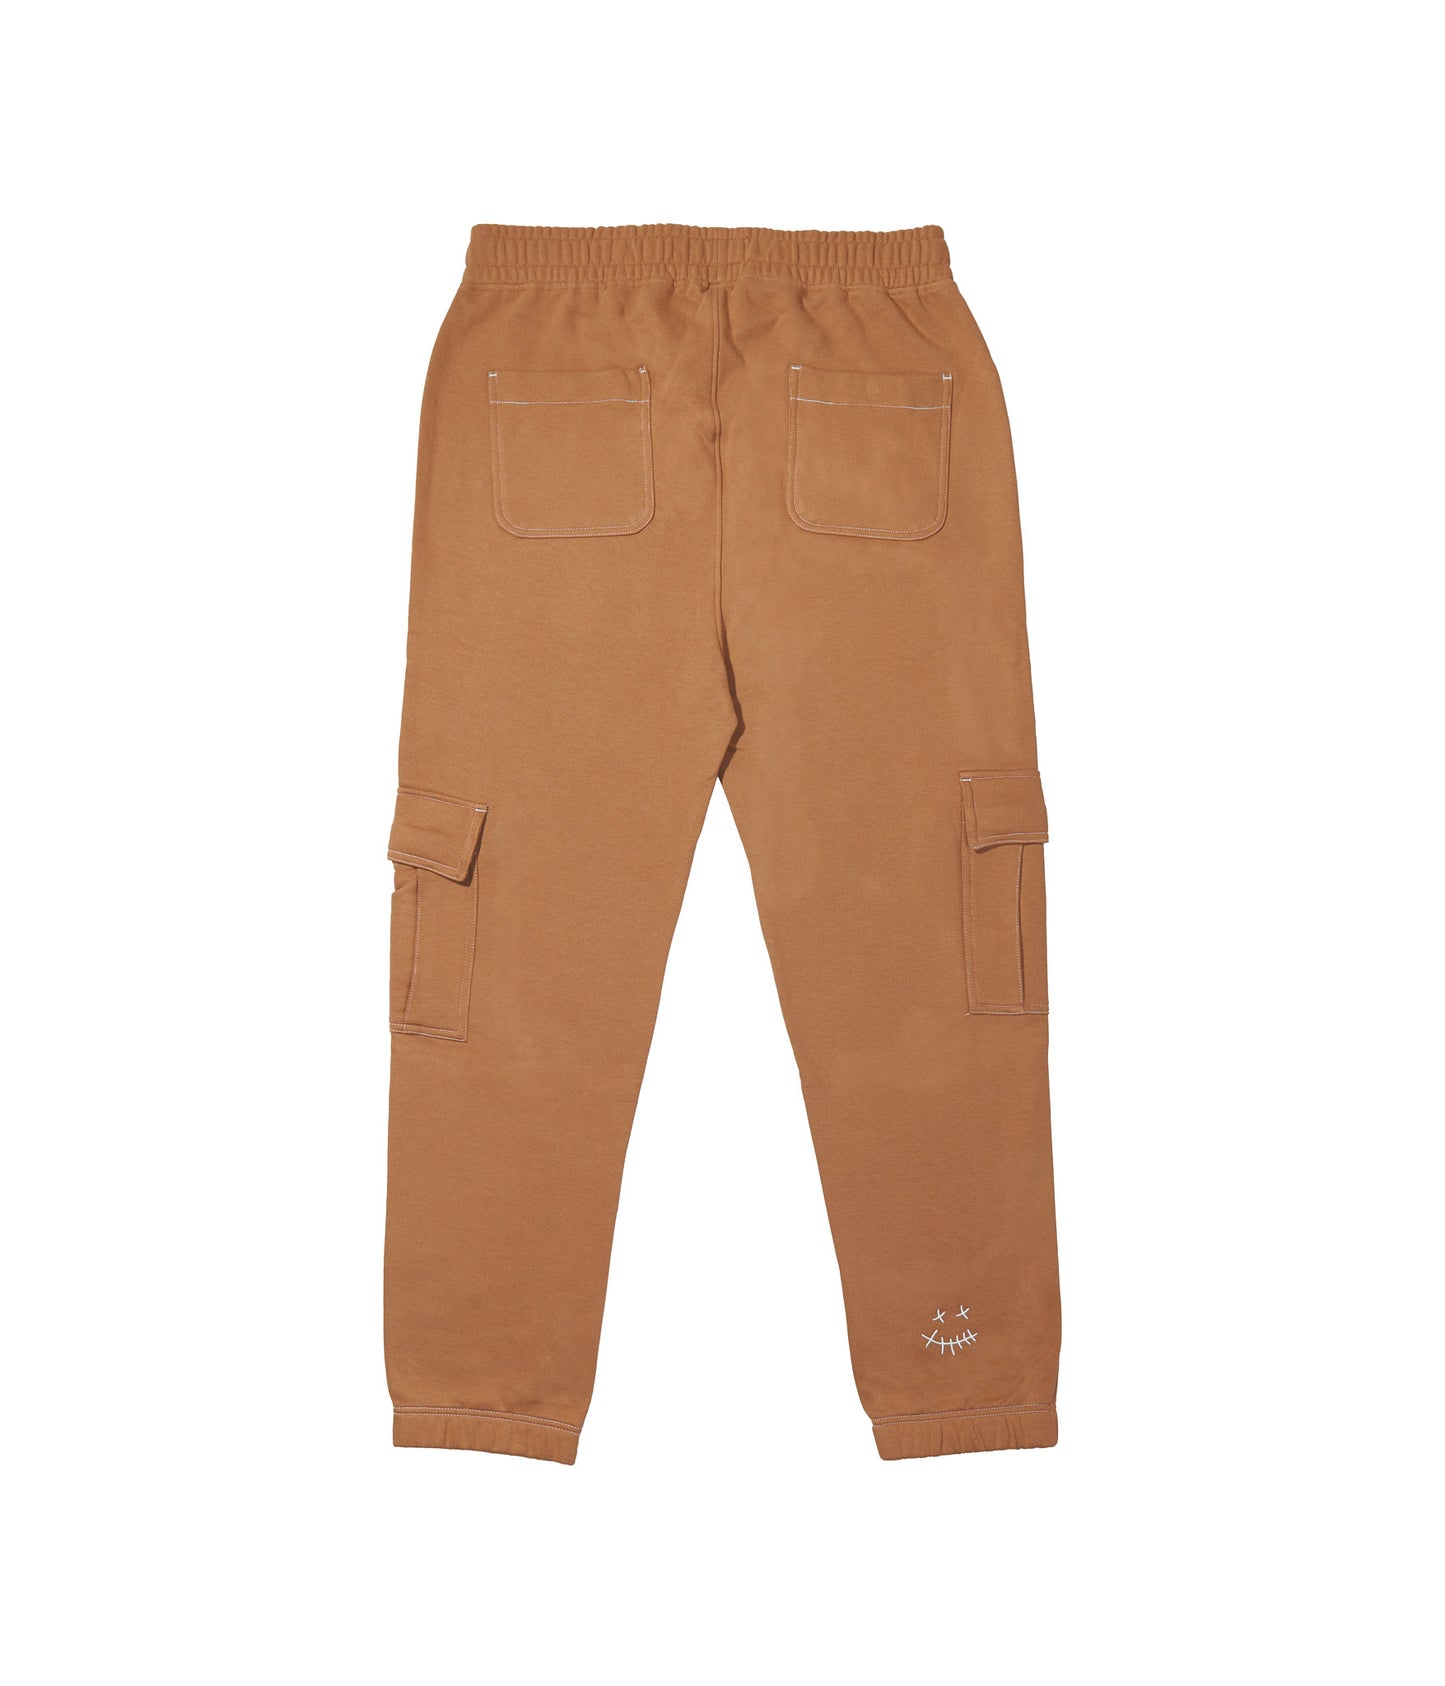 *SALE* TILL FOREVER TRACKPANTS (BISCOFF BROWN)